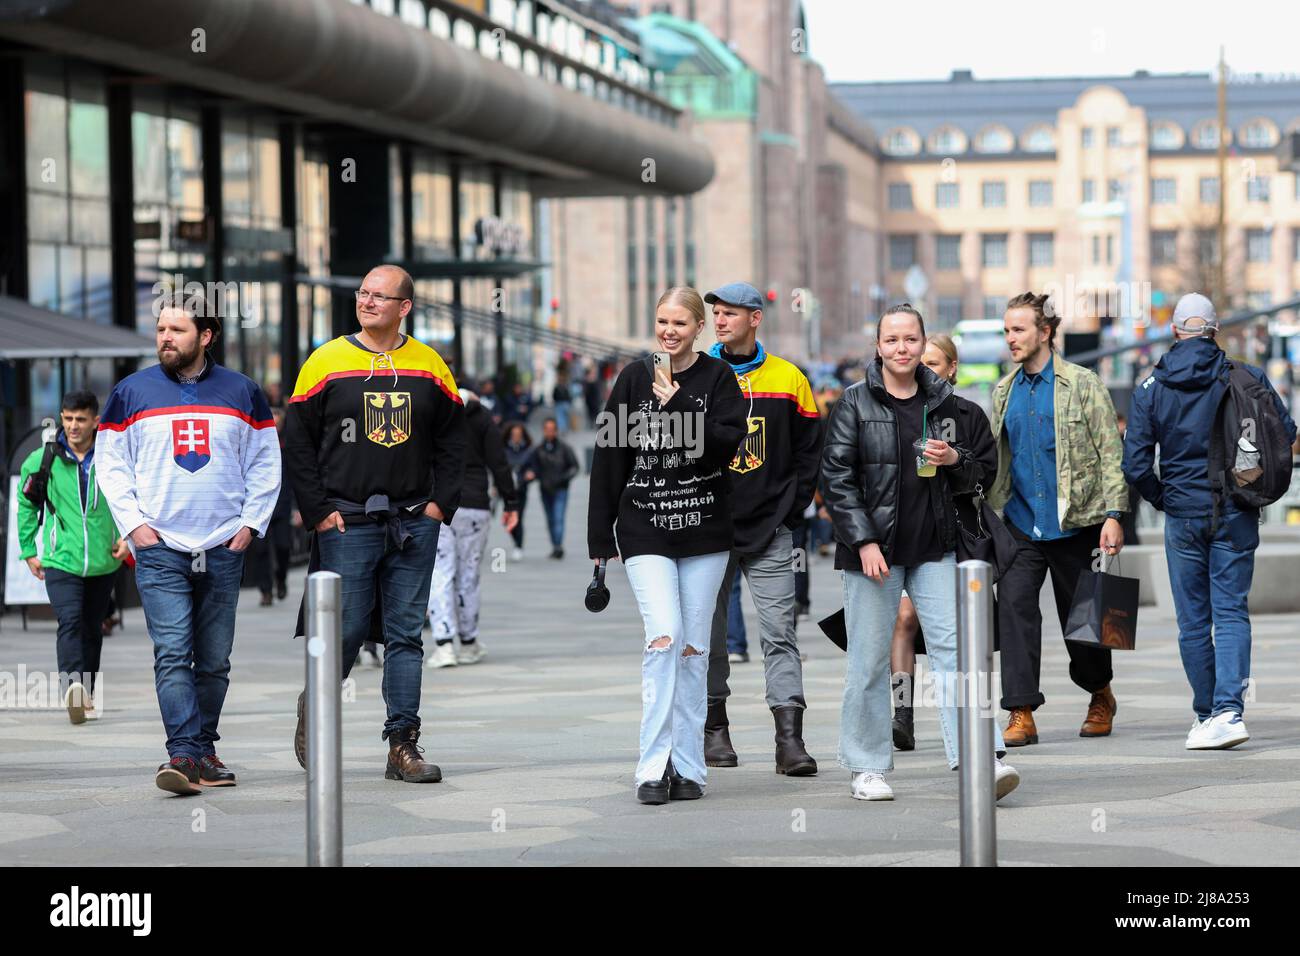 Fans of the German and Slovakian national ice hockey teams seen walking in Helsinki city center. On May 13, the Ice Hockey World Championship 2022 began in Finland. Hockey fans from many countries arrived in Helsinki and Tampere, the citys where the matches will take place. Stock Photo